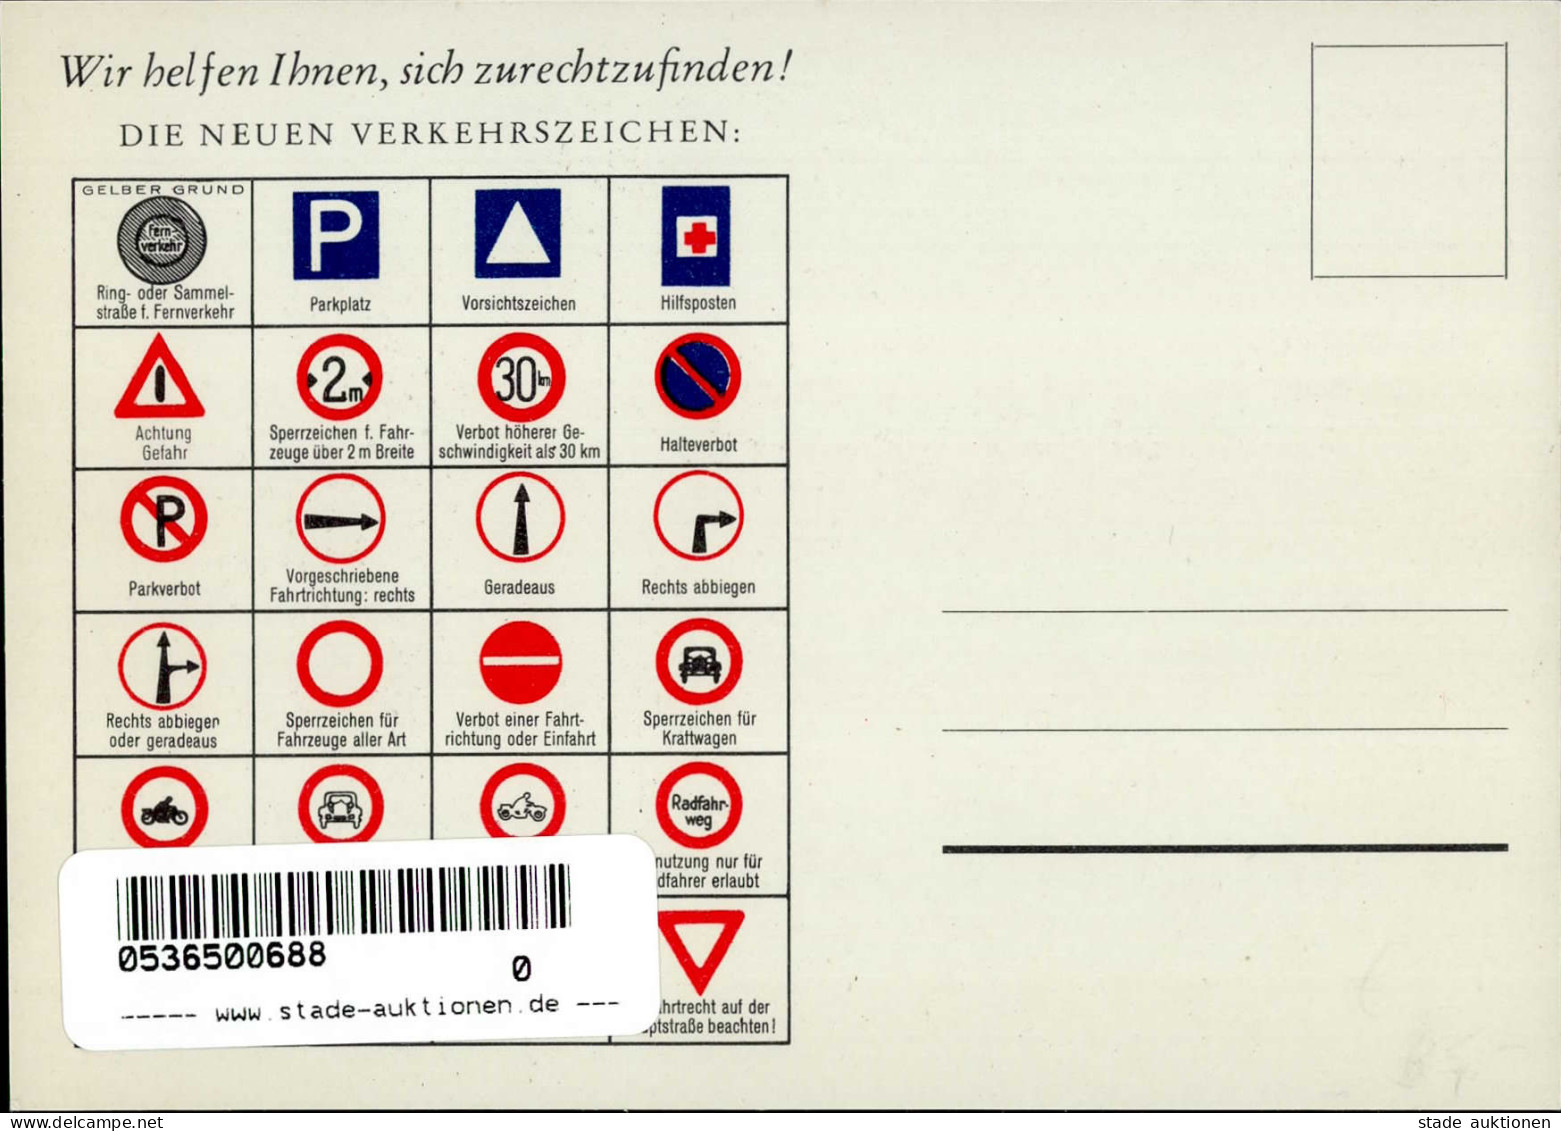 Auto Opel Typ Olympia Werbung  I-II Publicite - Other & Unclassified